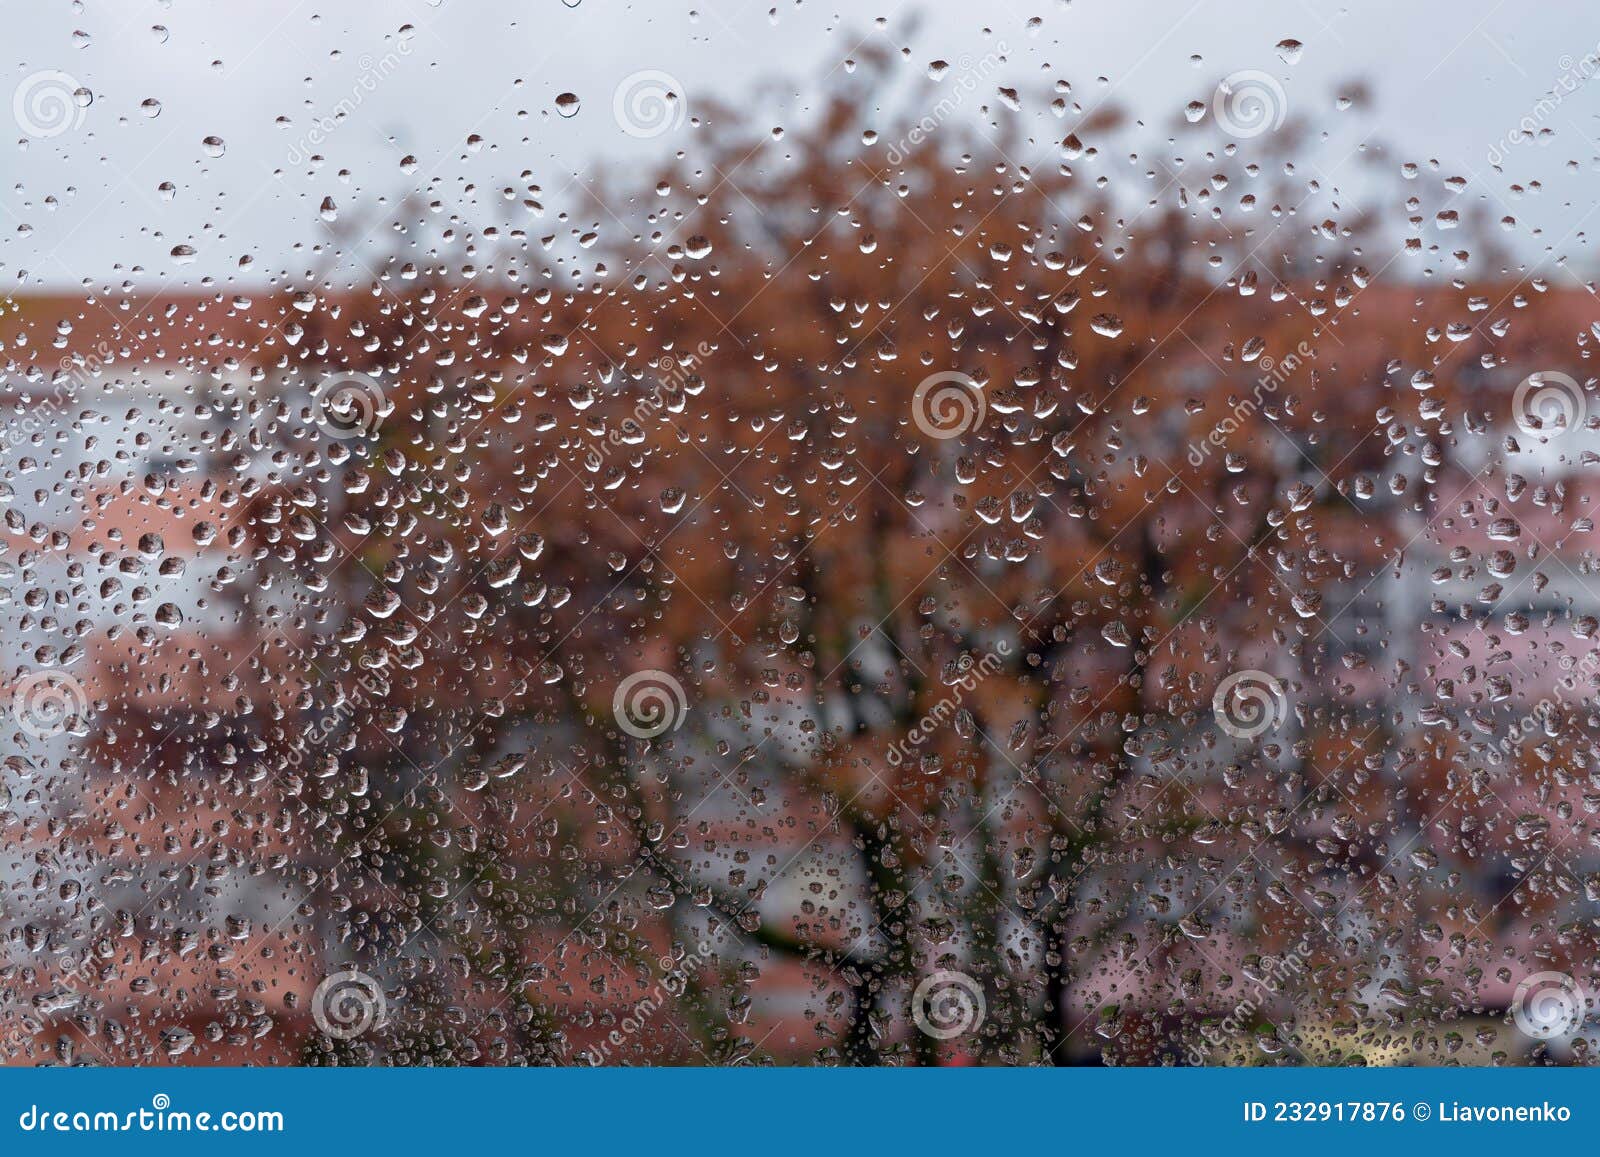 raindrops on the glass. window in march. season specific. portugal. almada. early spring.